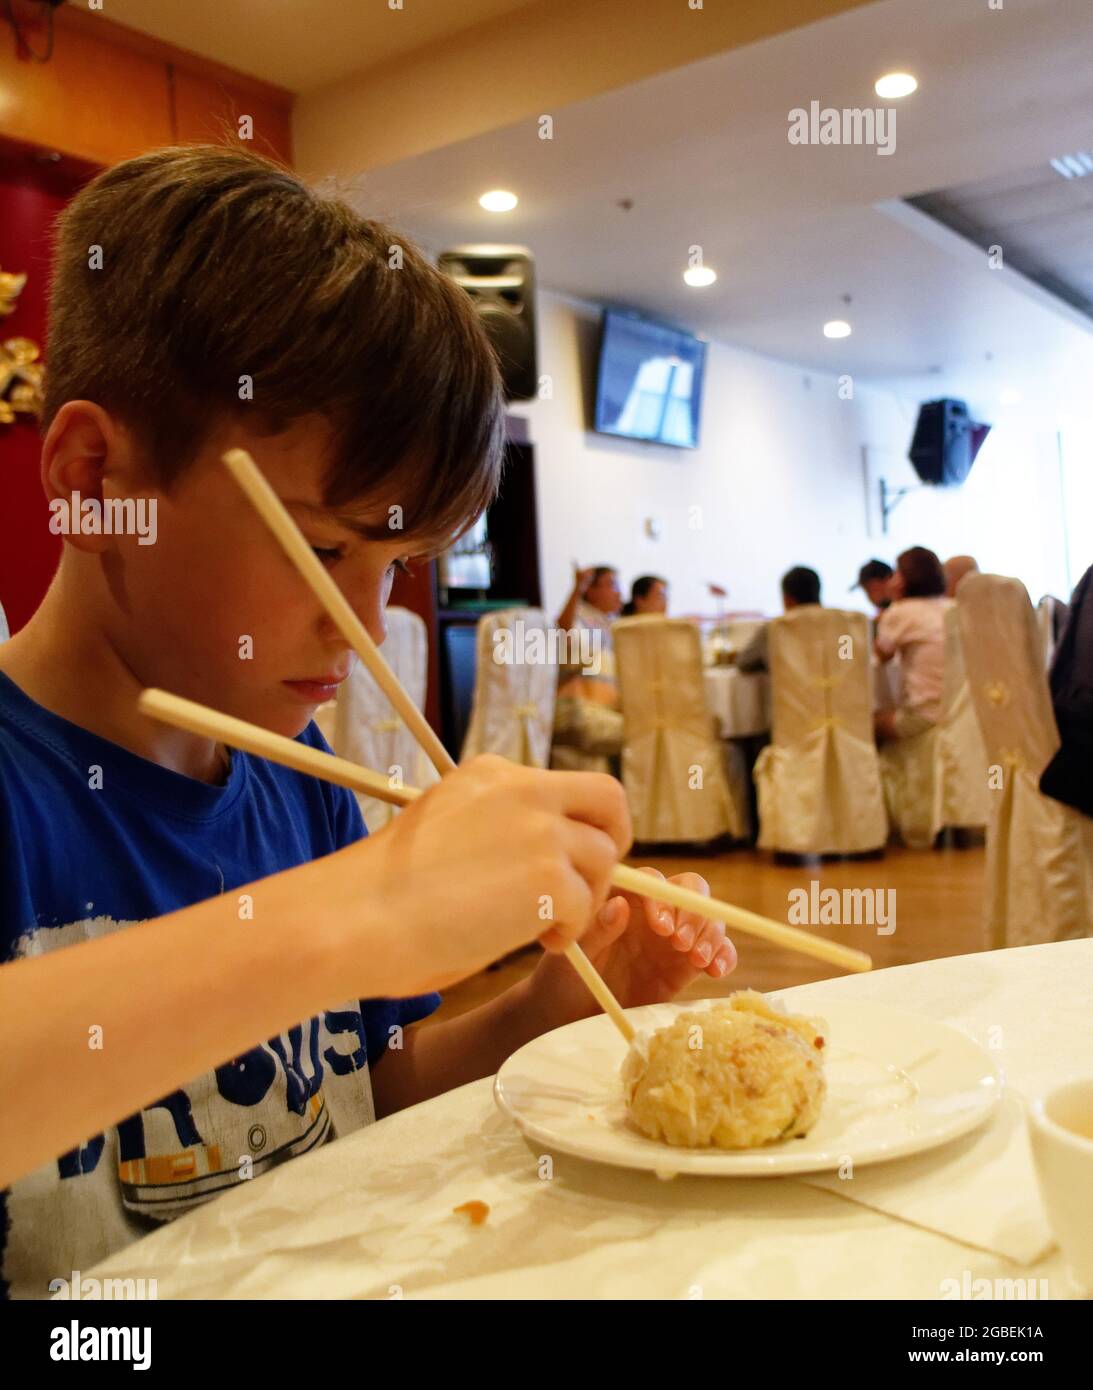 A young boy (9 yr old) eating with chopsticks Stock Photo